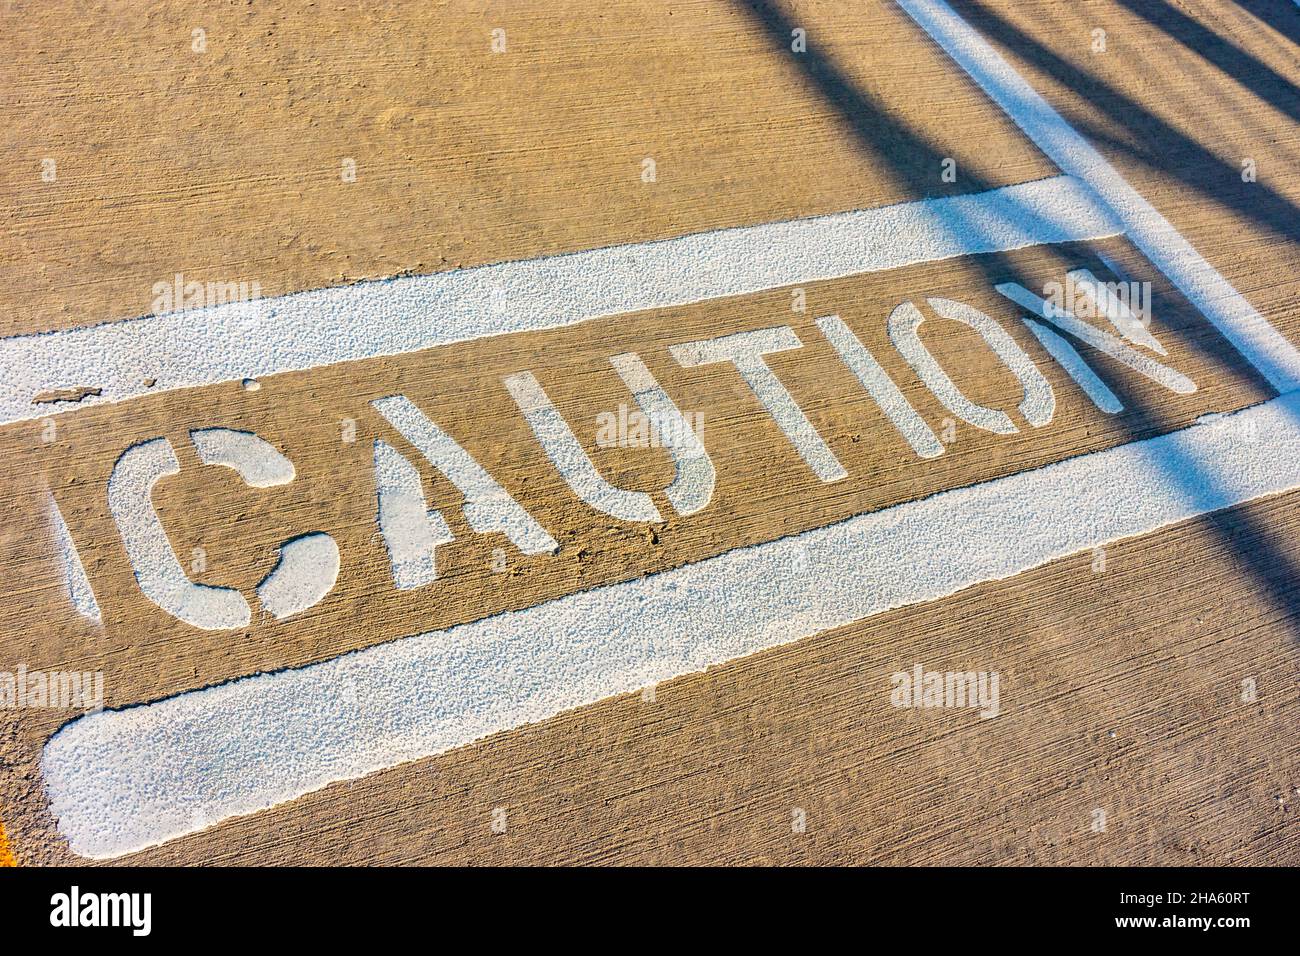 The word caution spelled out in white paint on the sidewalk. Stock Photo